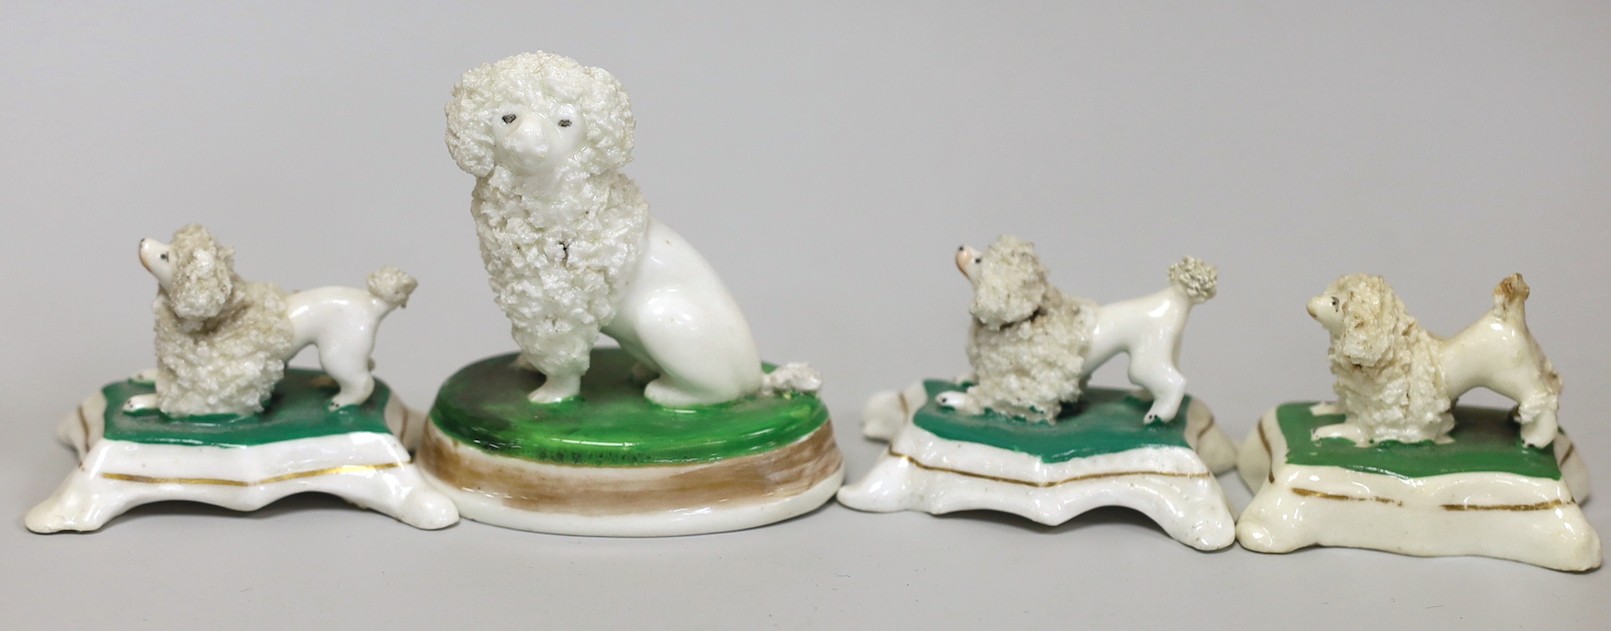 Four small Staffordshire models of poodles, c.1830-50, tallest 7cms high, Provenance Dennis G.Rice collection